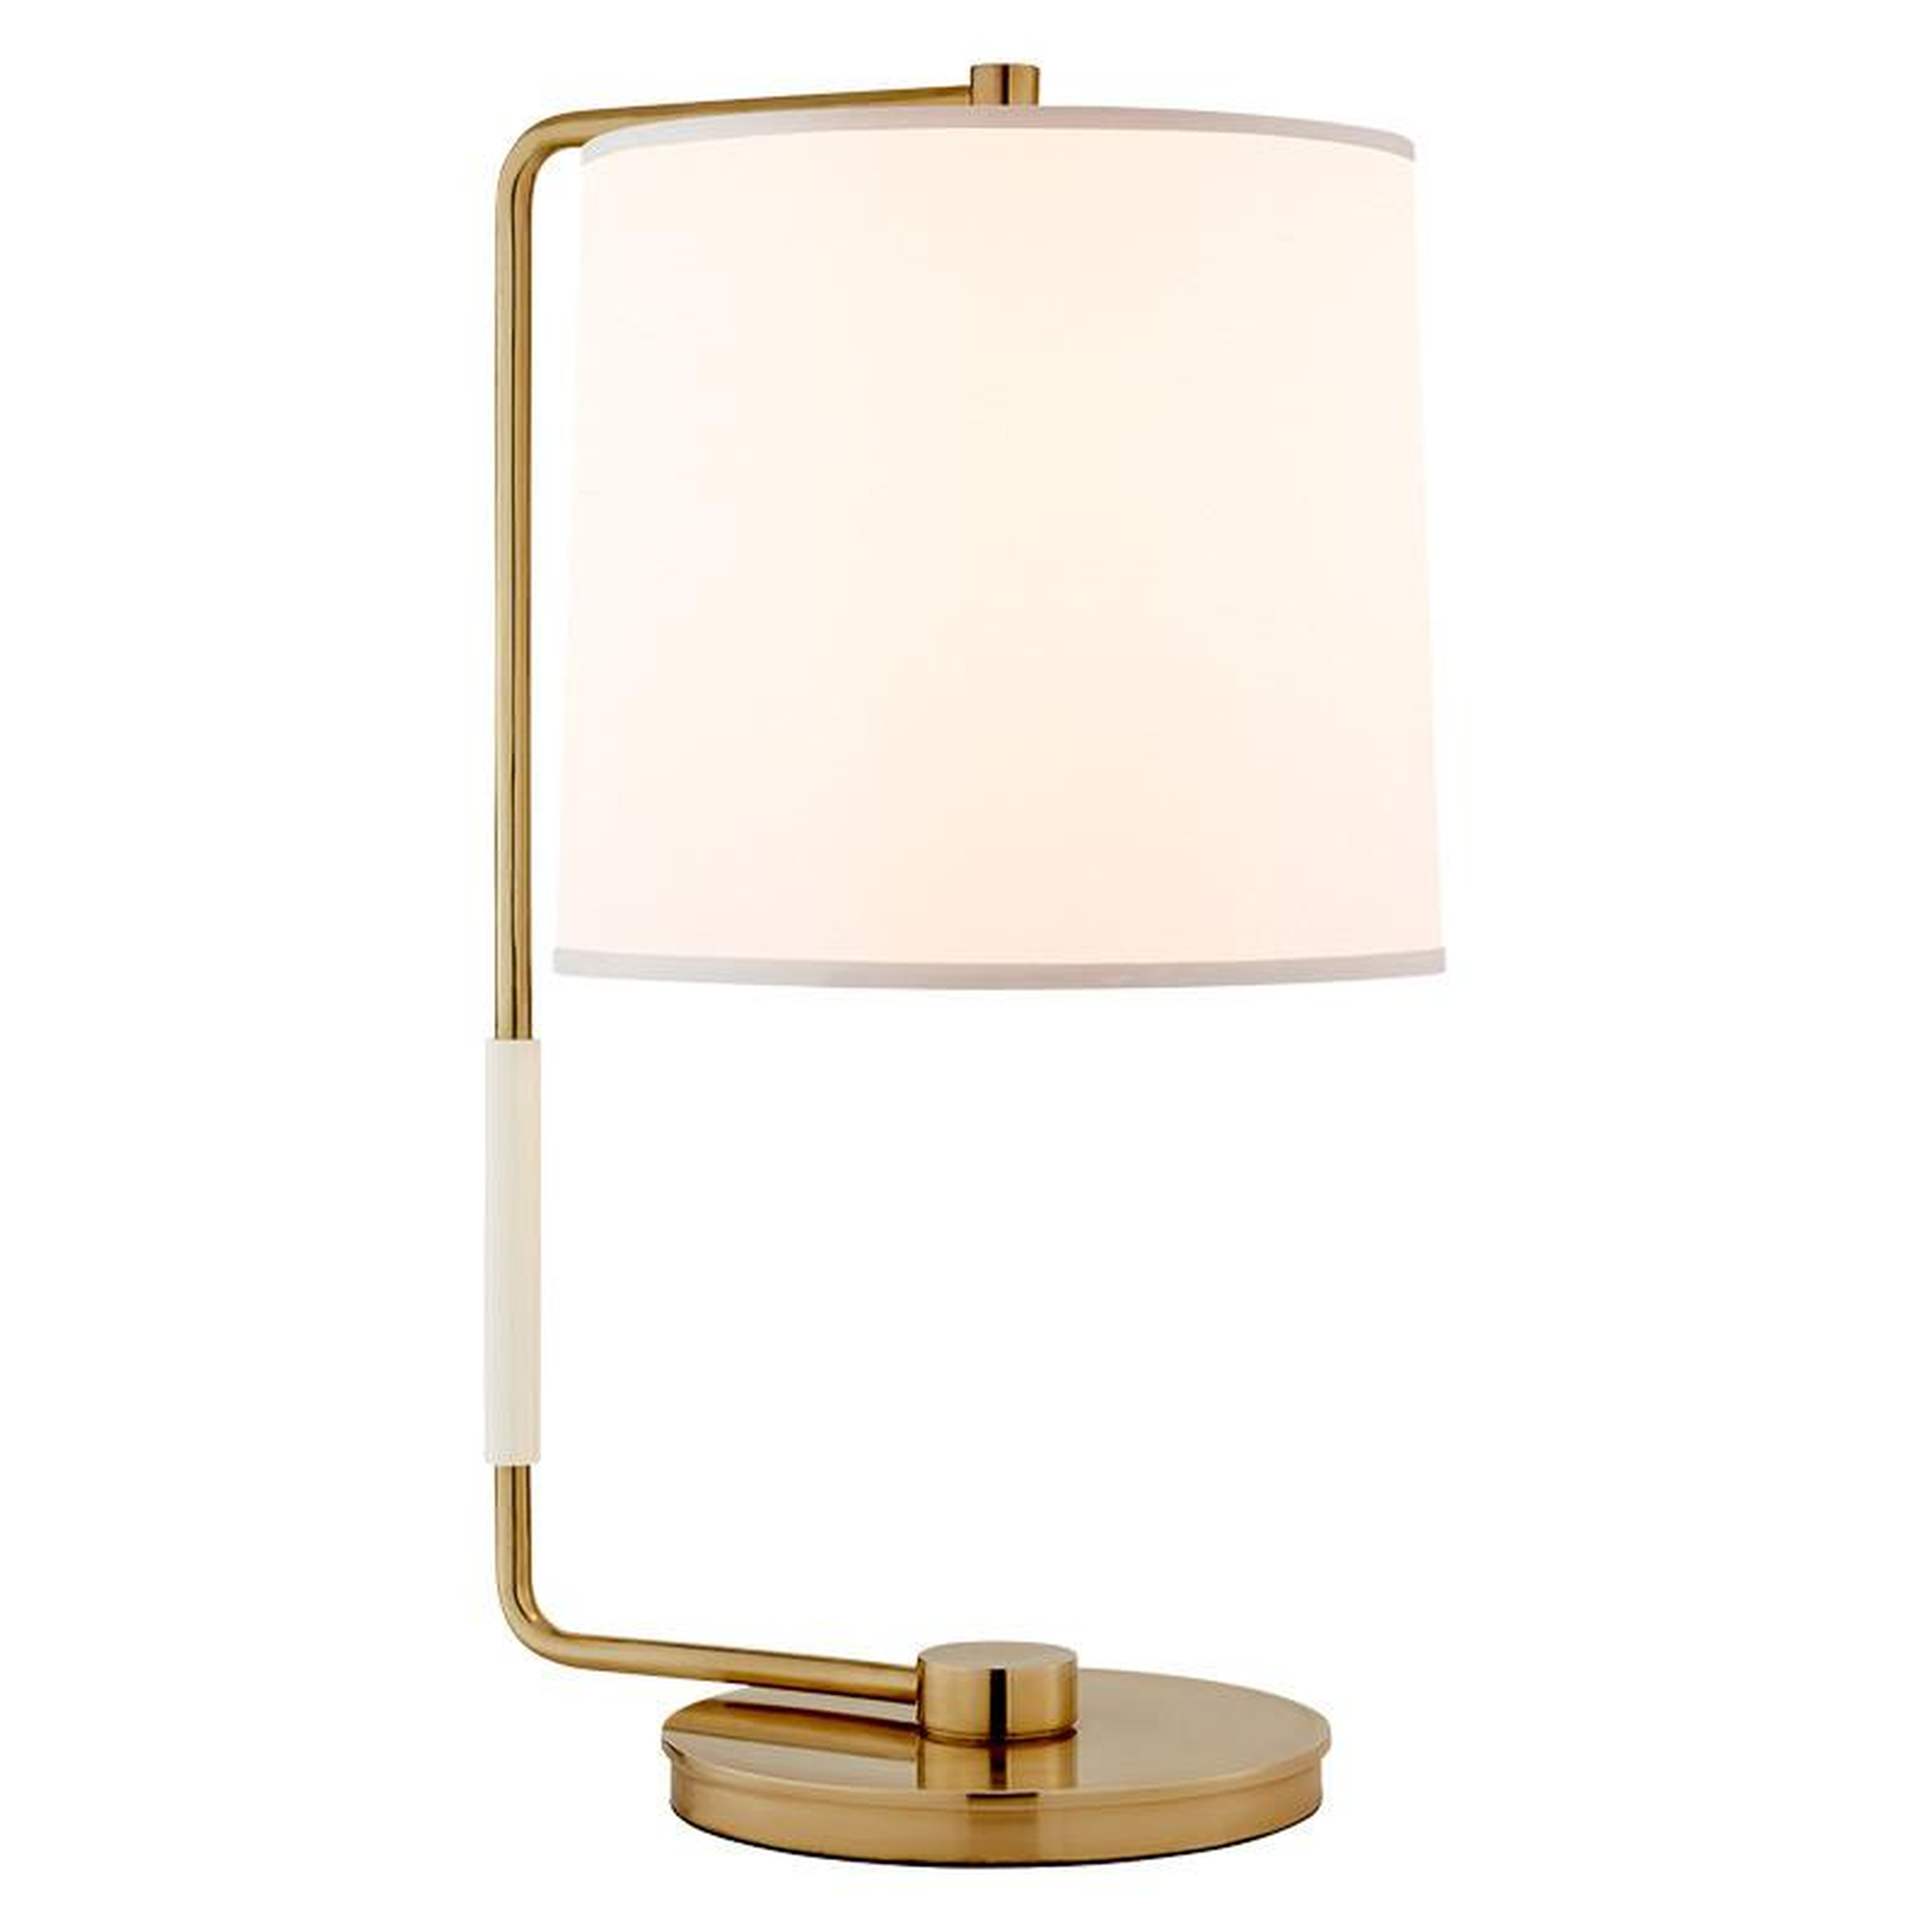 SWING TABLE LAMP - SOFT BRASS - McGee & Co.